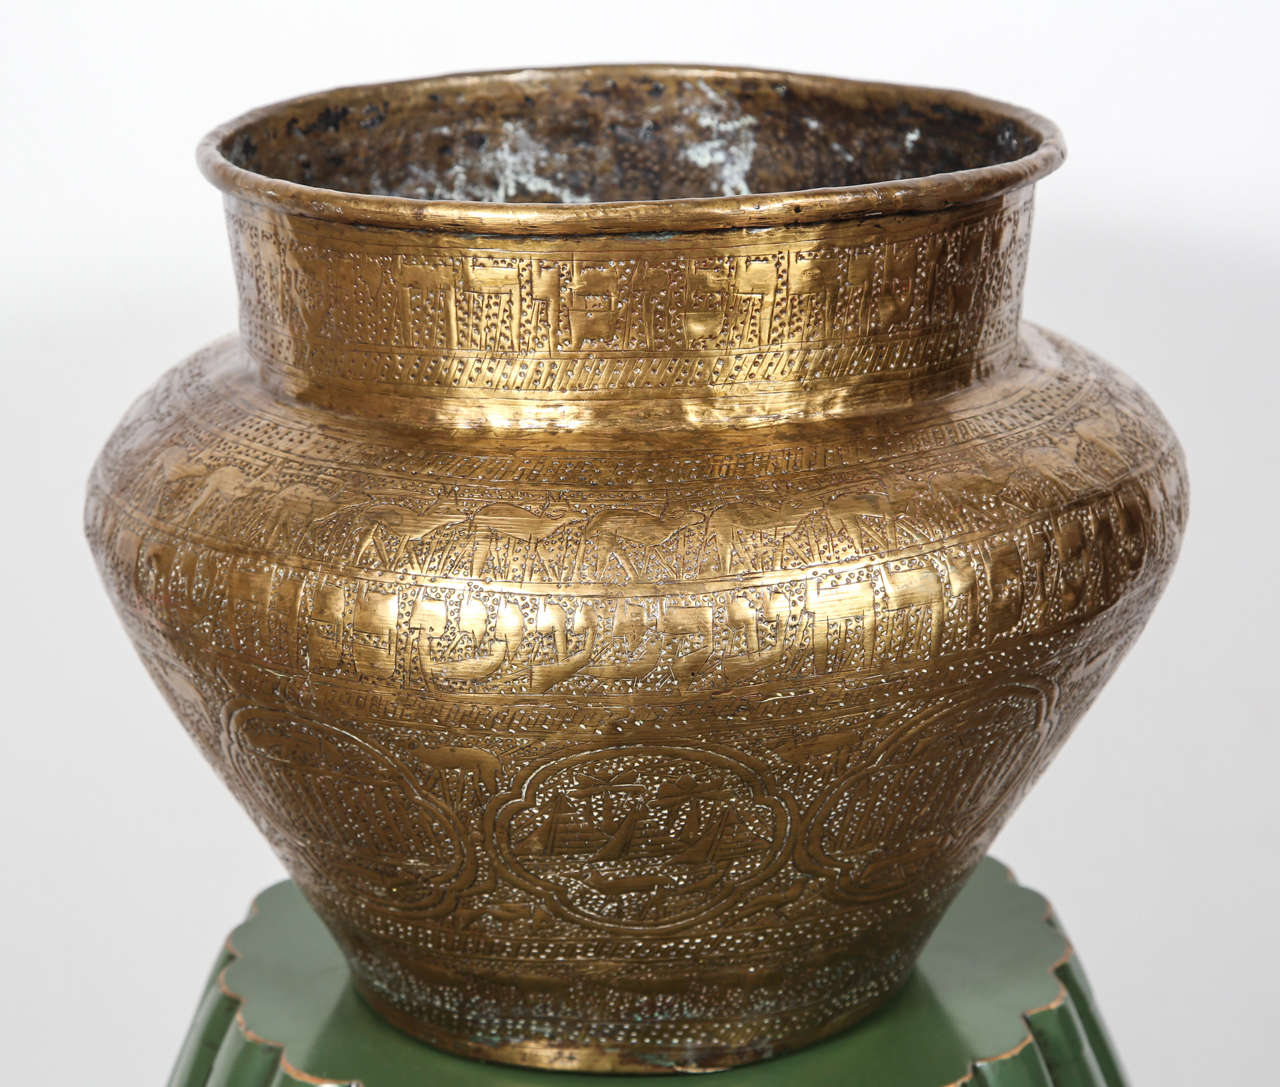 19th century large Jewish Egyptian finely hand etched brass memorial bowl decorated with medallions with Hebrew inscriptions, pyramids, sphinx, and human figures; the motifs are from the period of slavery in Egypt.
Could be used as a